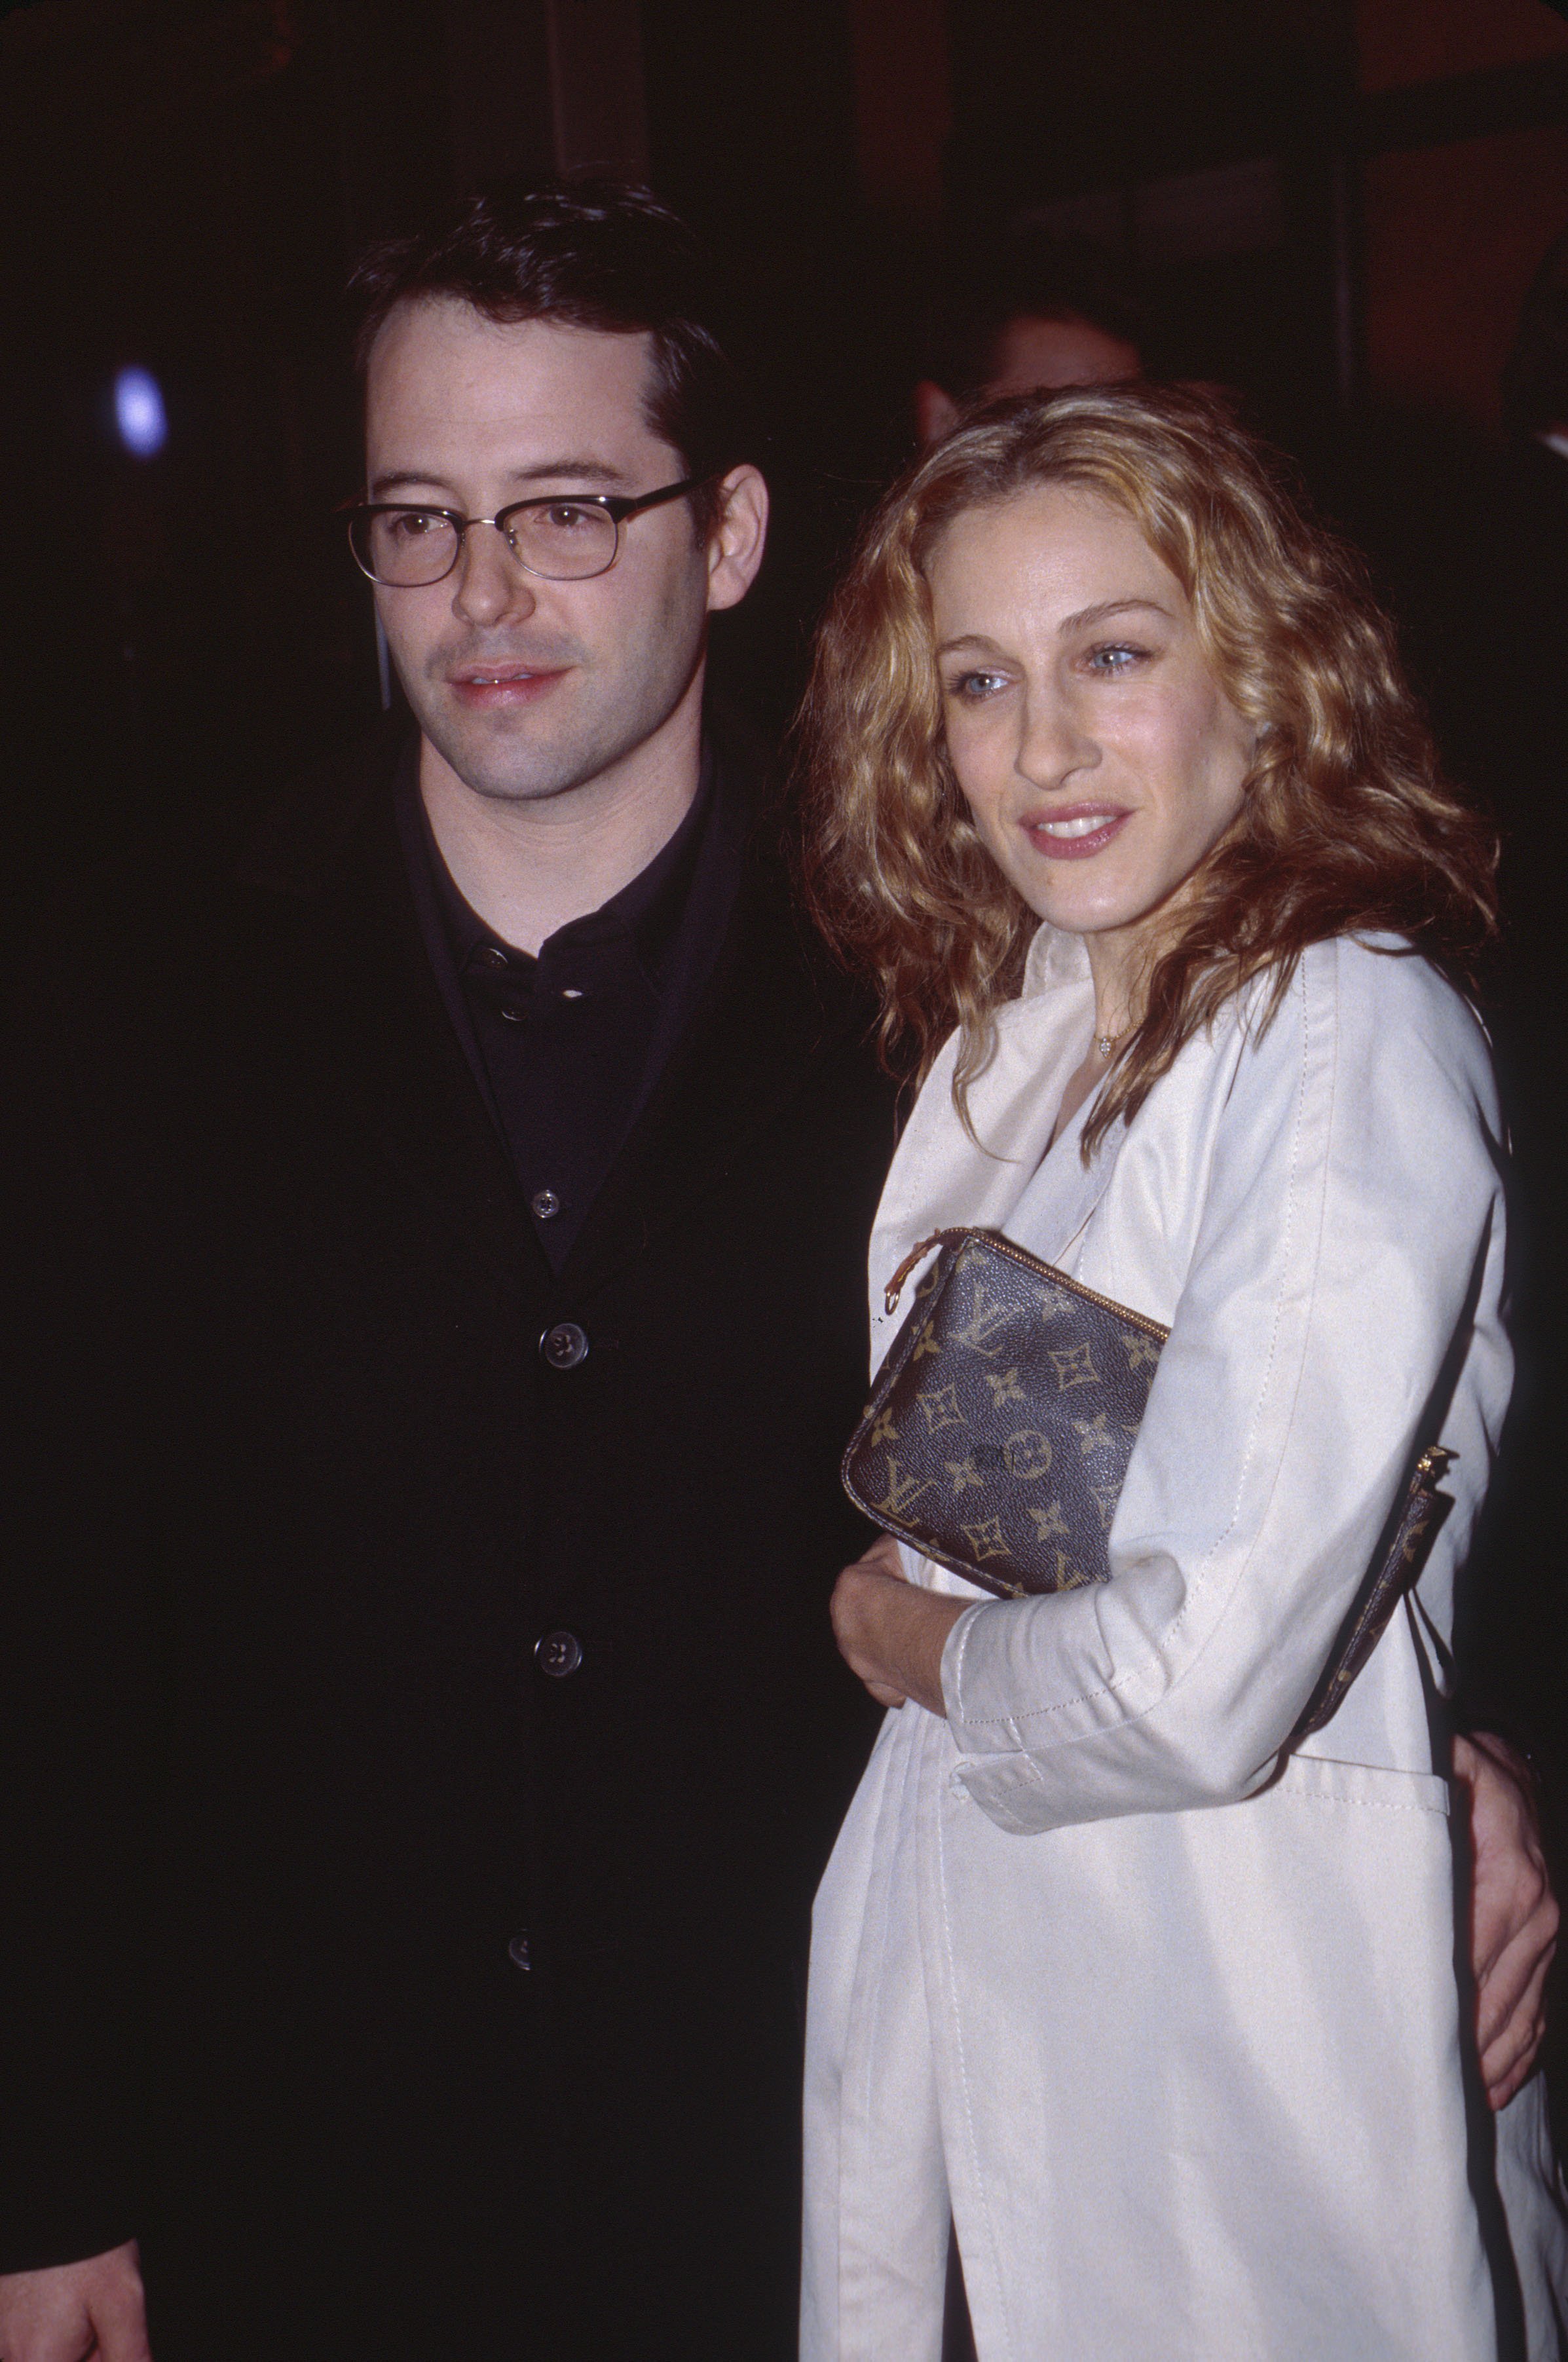 Matthew Broderick and Sarah Jessica Parker at the premiere of The Sopranos in New York on May 1, 2000. | Source: Getty Images City 